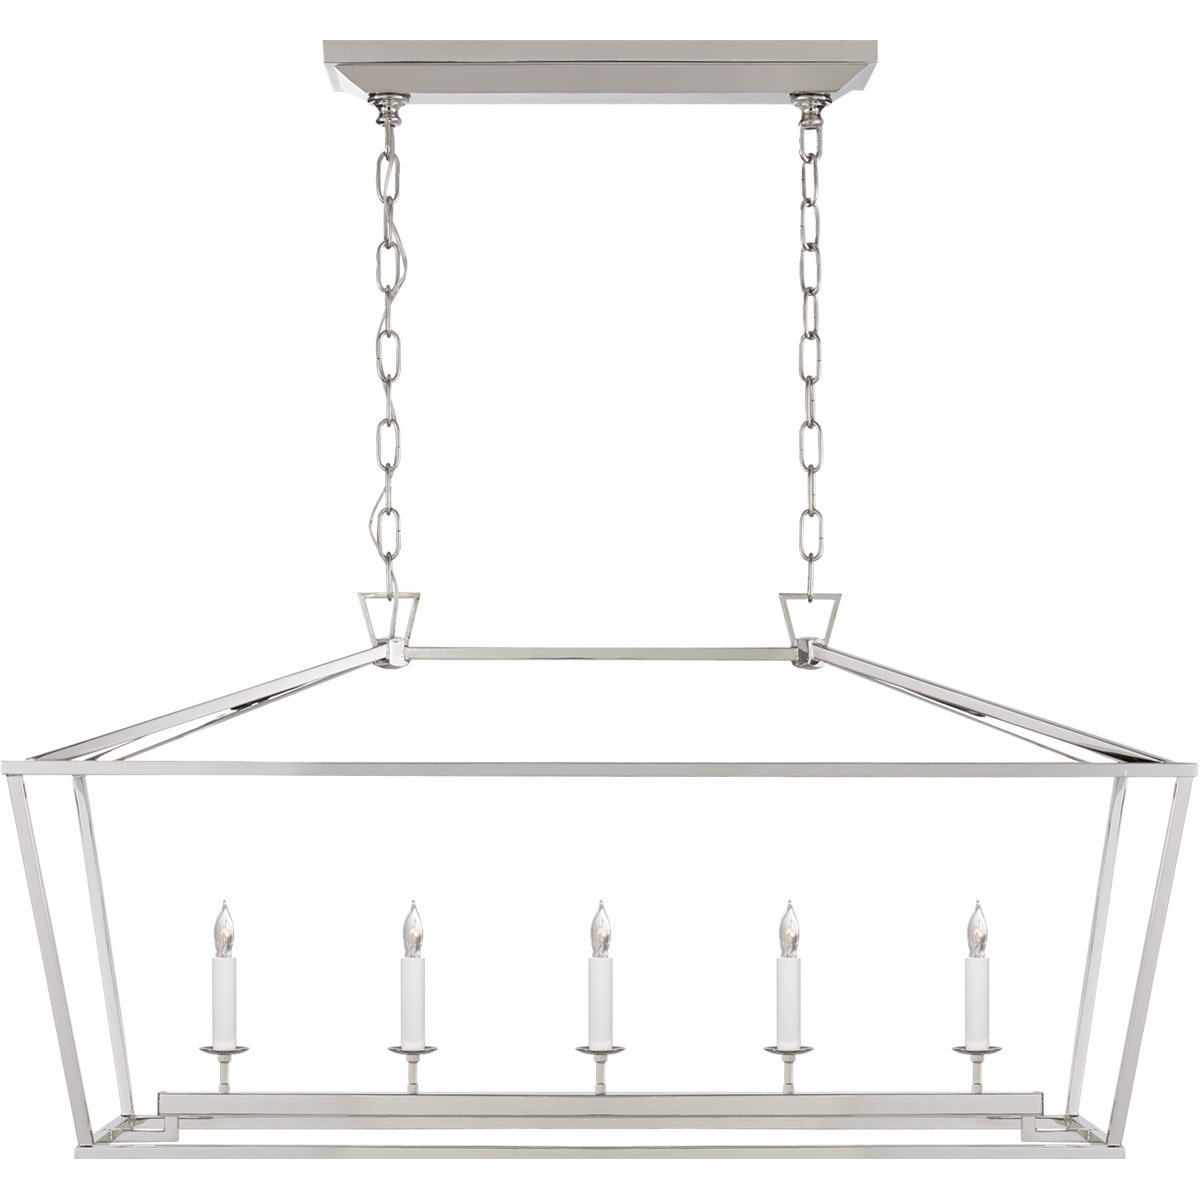 E.F. Chapman Arch Top Lantern in Polished Nickel by Visual Comfort  Signature at Destination Lighting